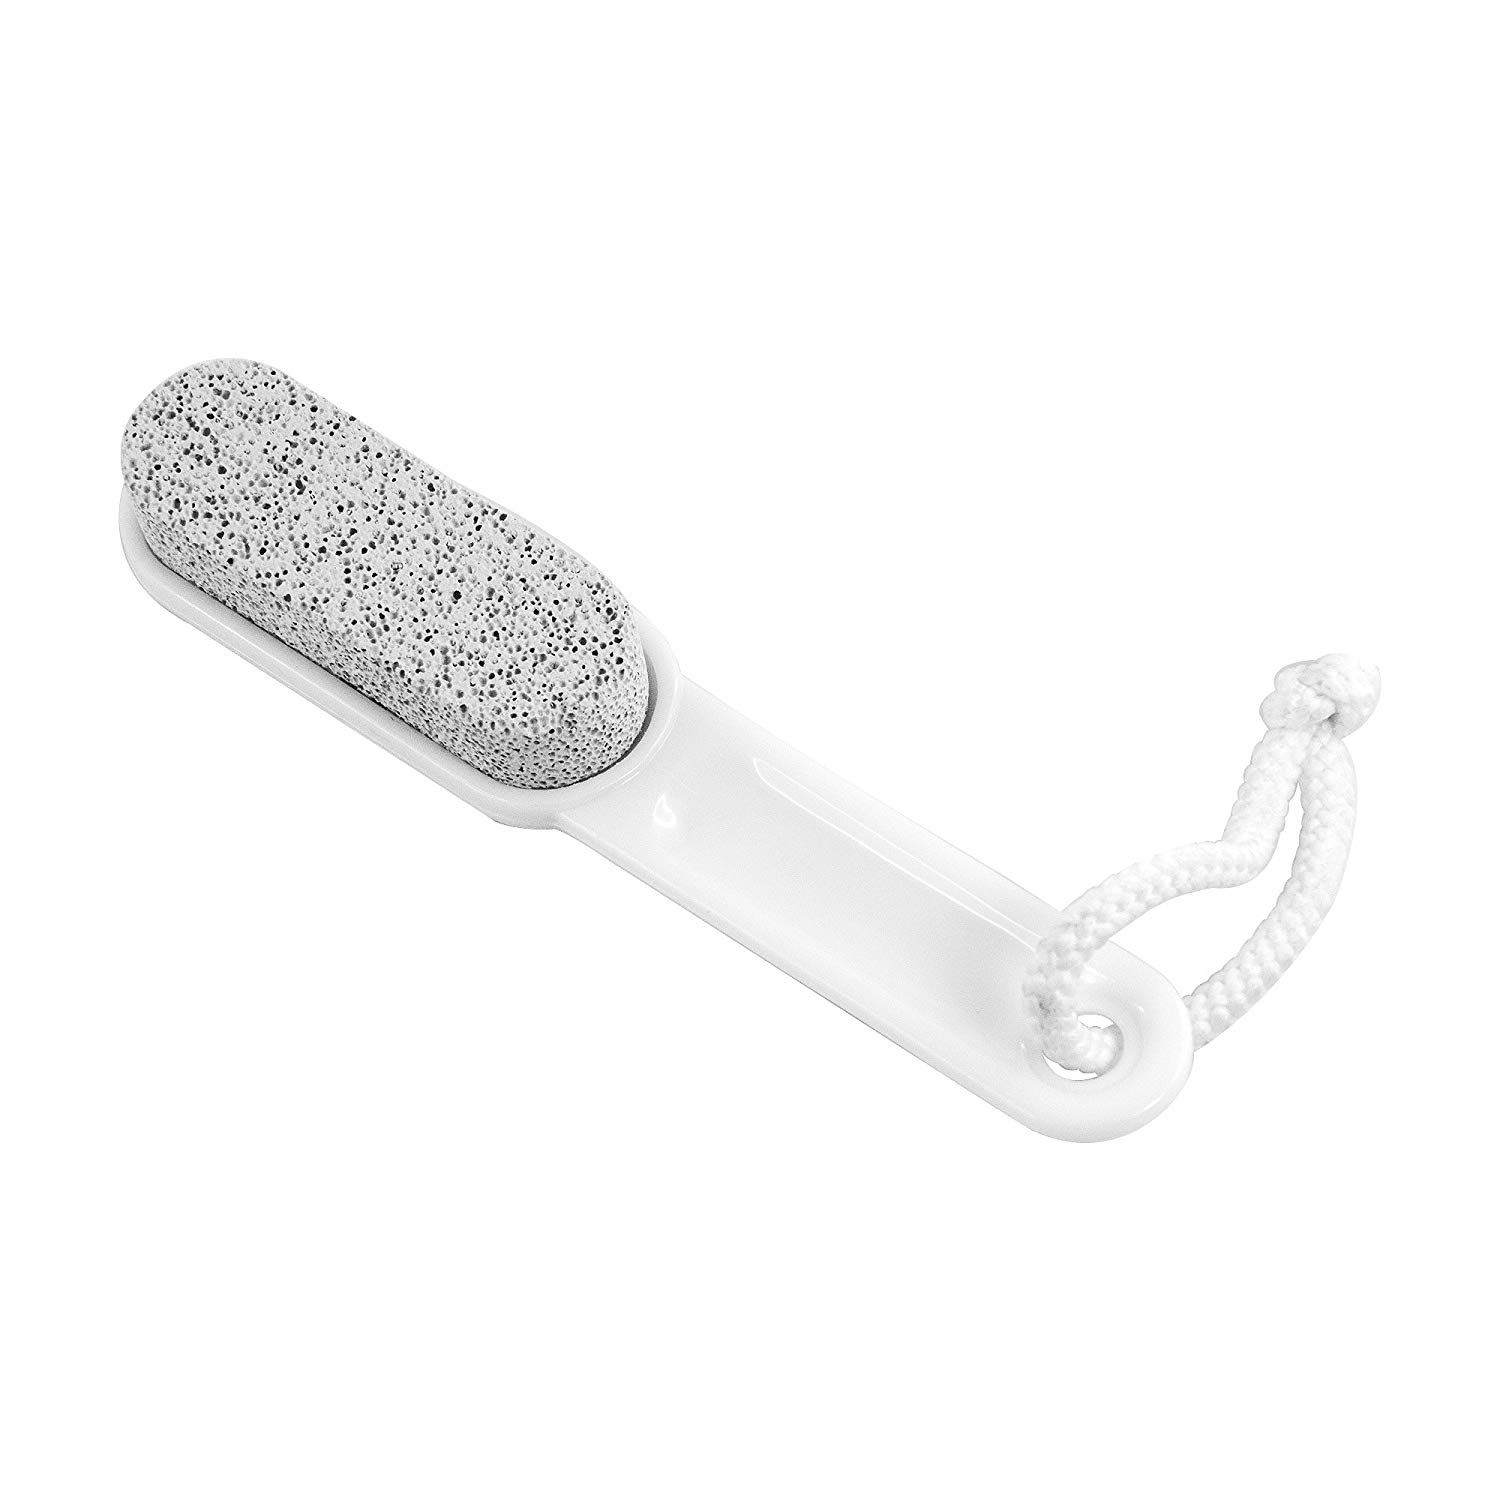 Buy Panache Foot Pumice Paddle Milky White - Purplle